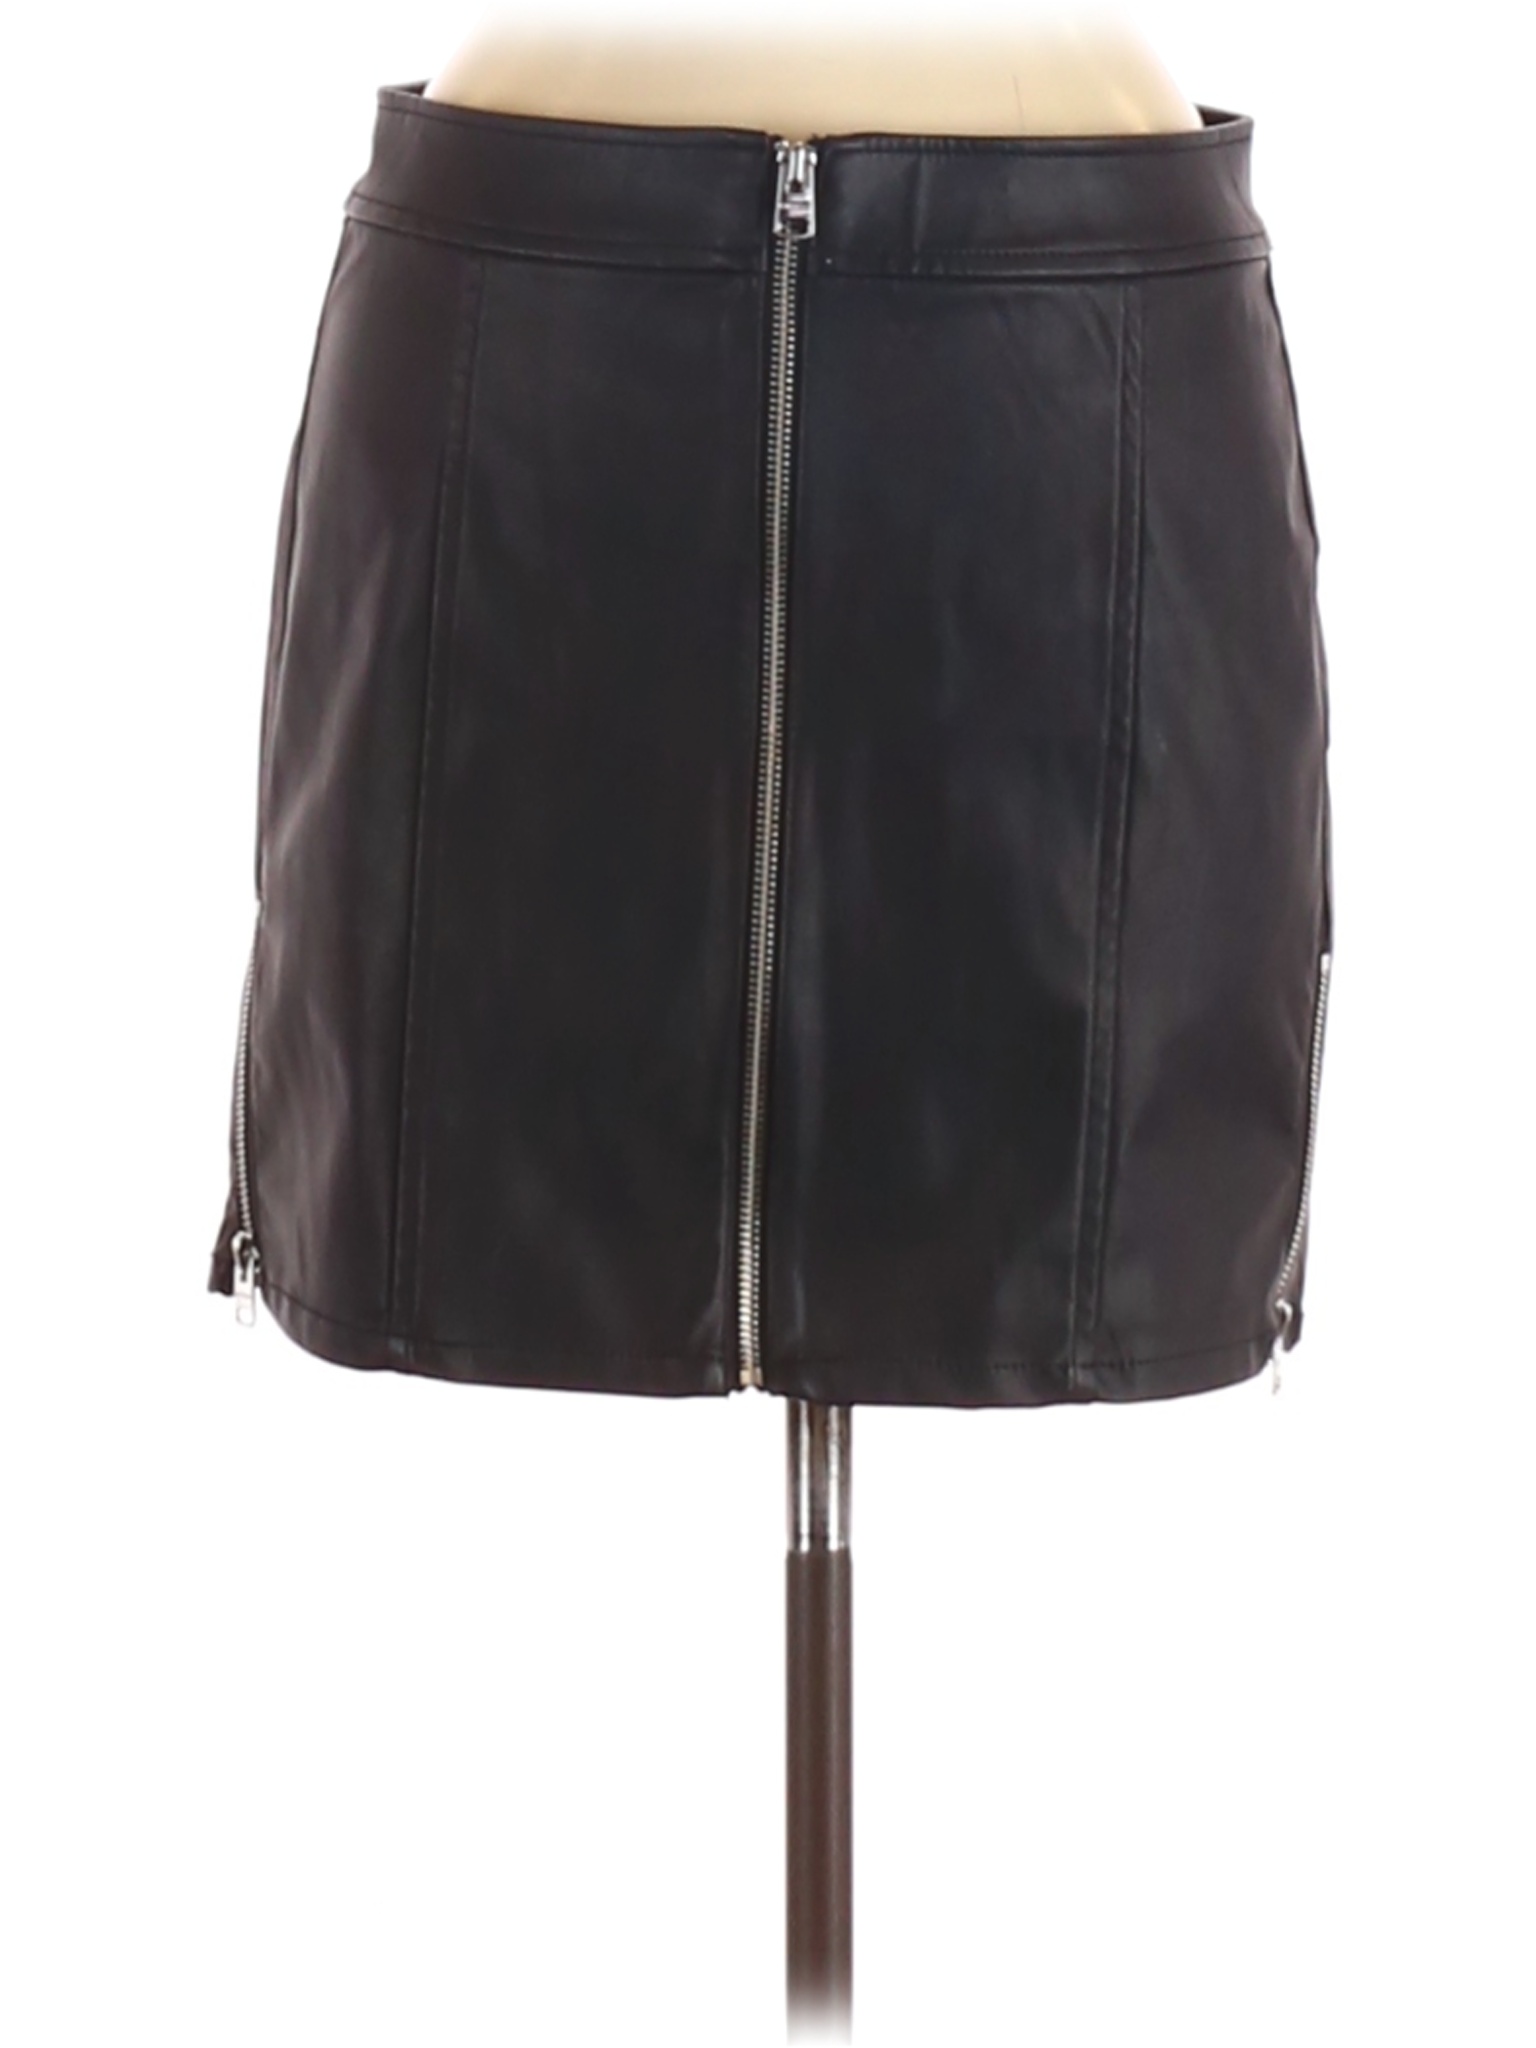 Express Outlet Women Black Faux Leather Skirt 6 | eBay